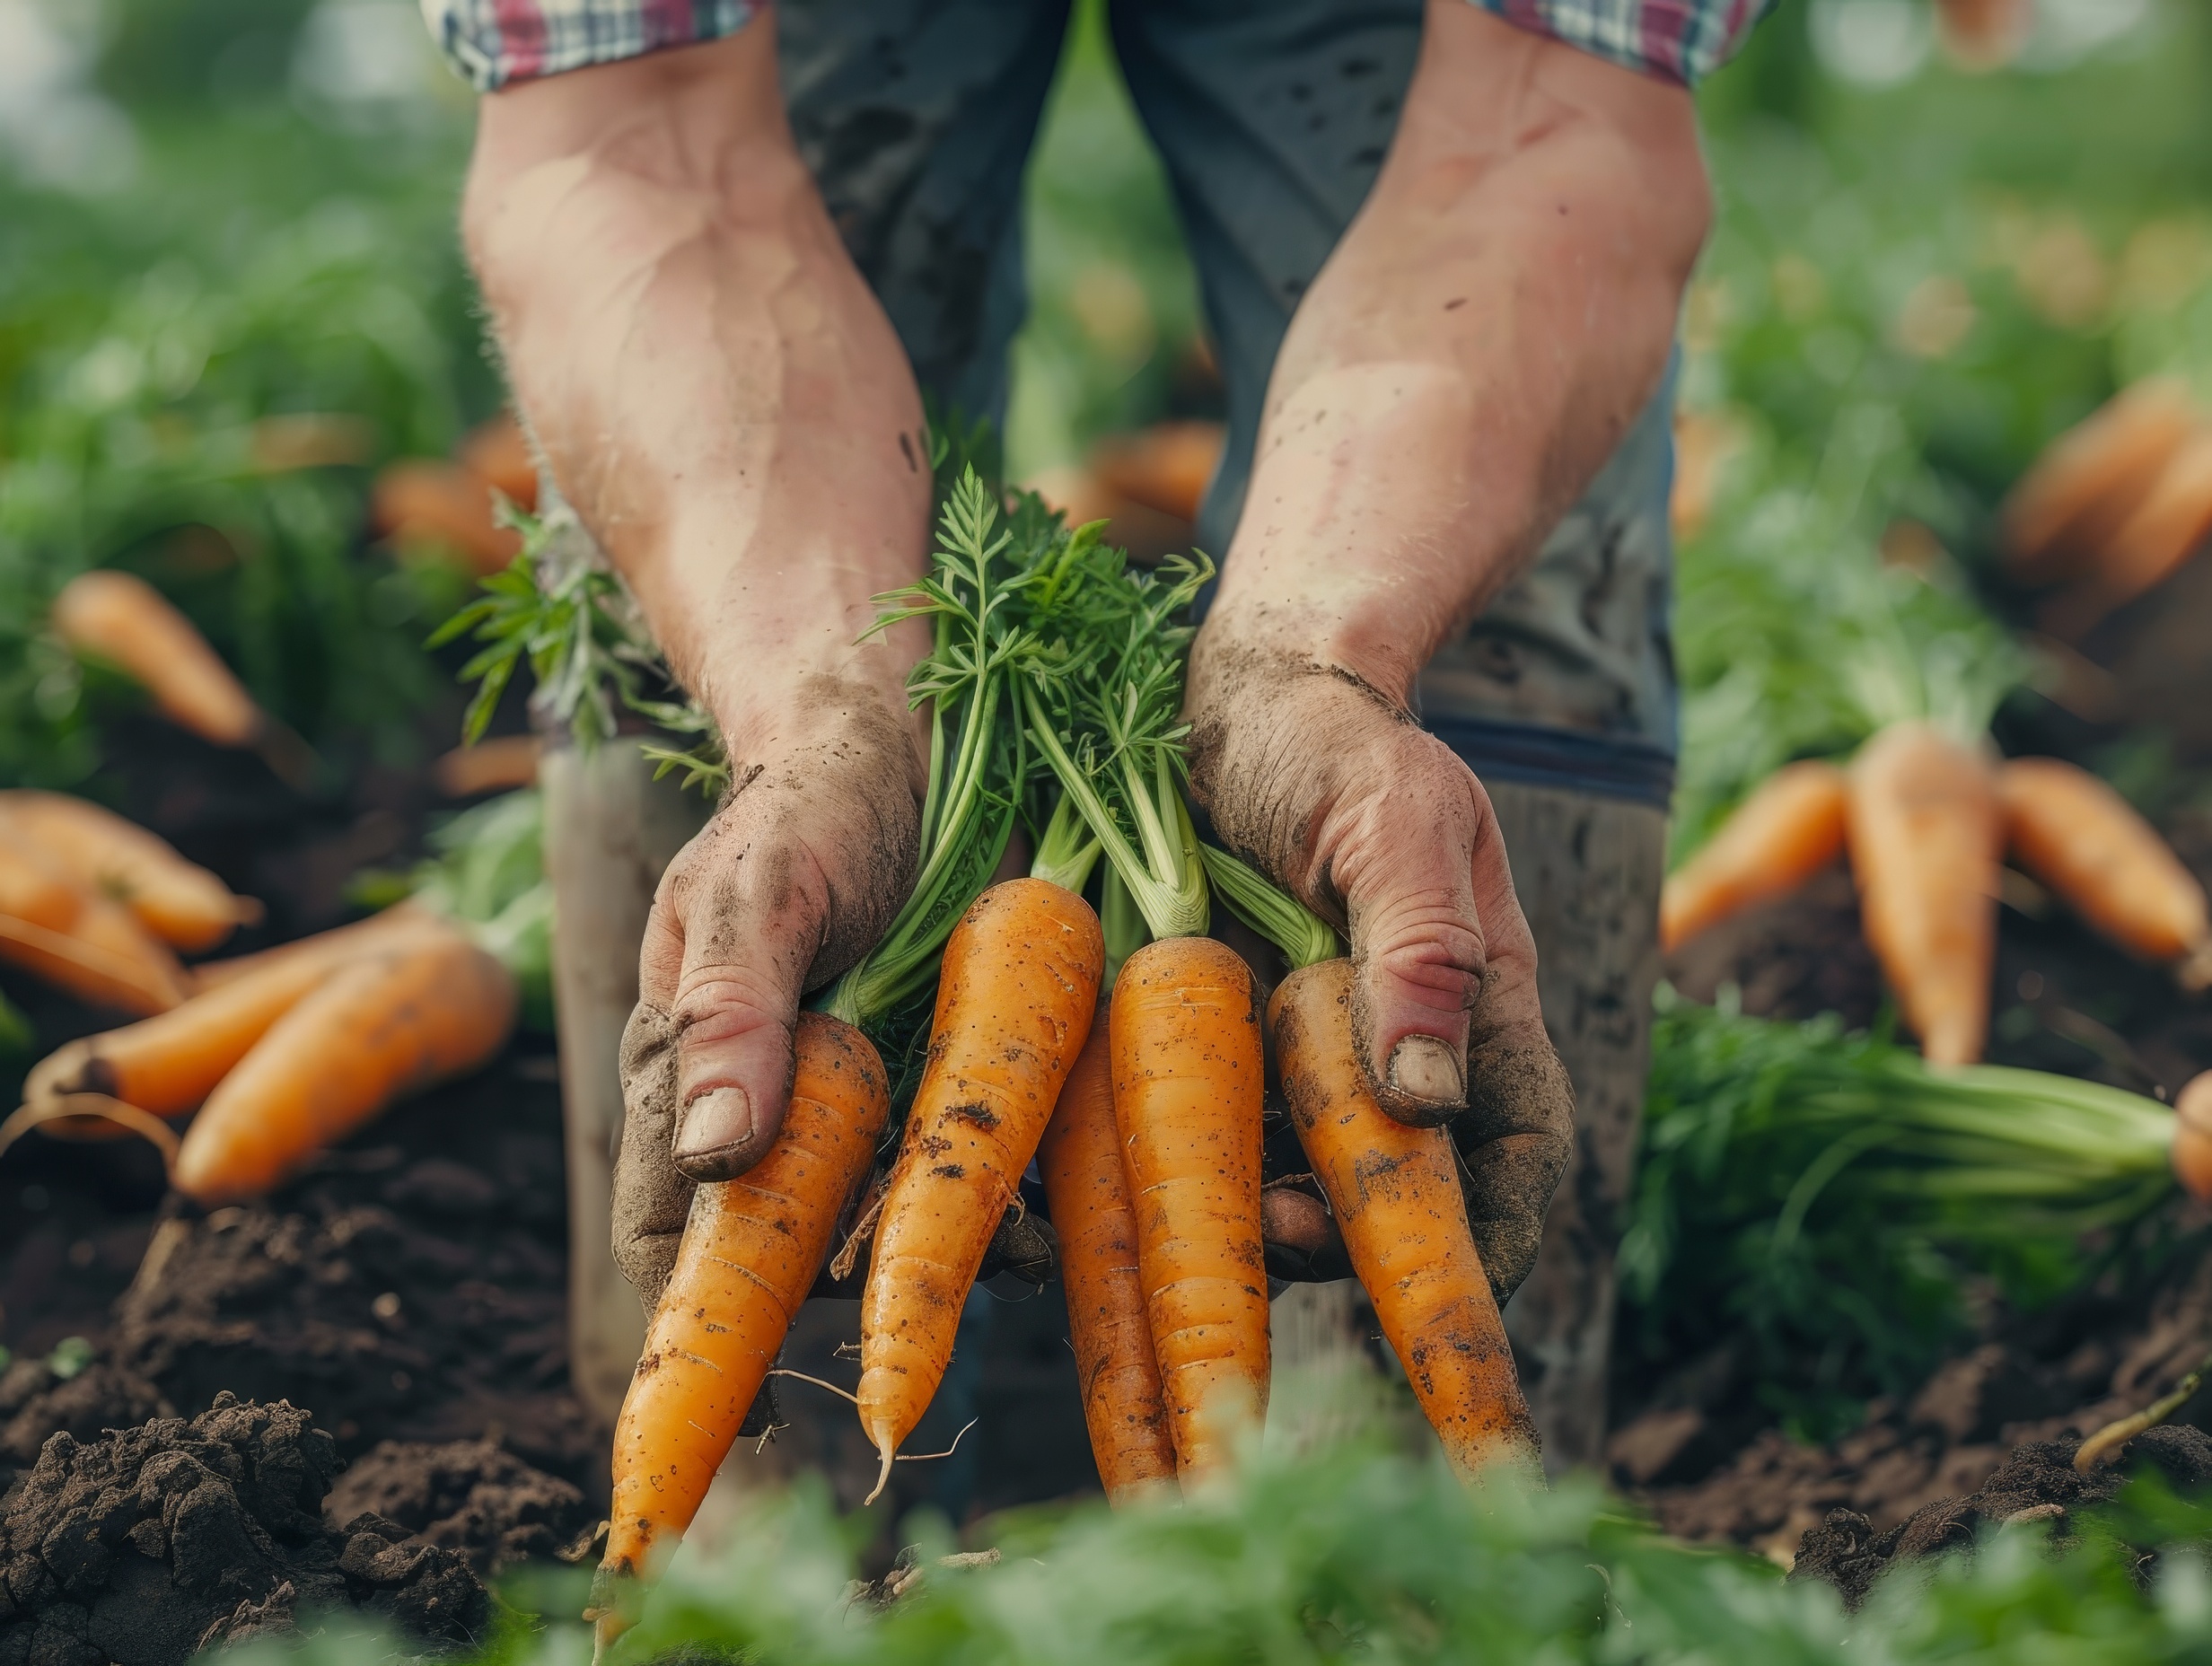 Hands pulling carrots from the carrot field